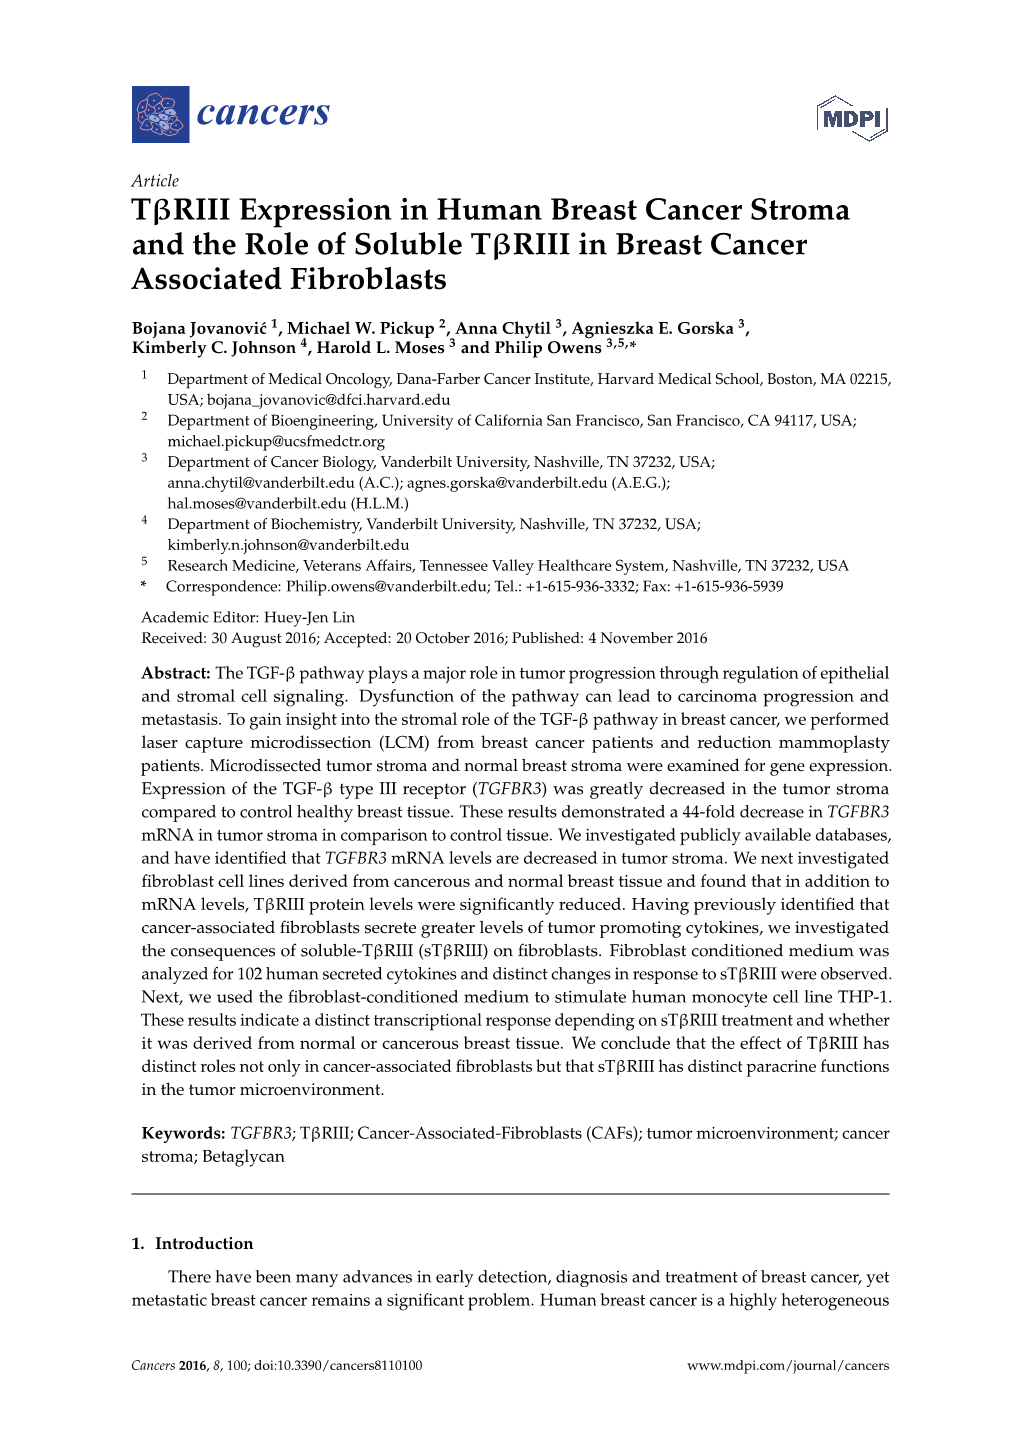 TRIII Expression in Human Breast Cancer Stroma and the Role of Soluble TRIII in Breast Cancer Associated Fibroblasts